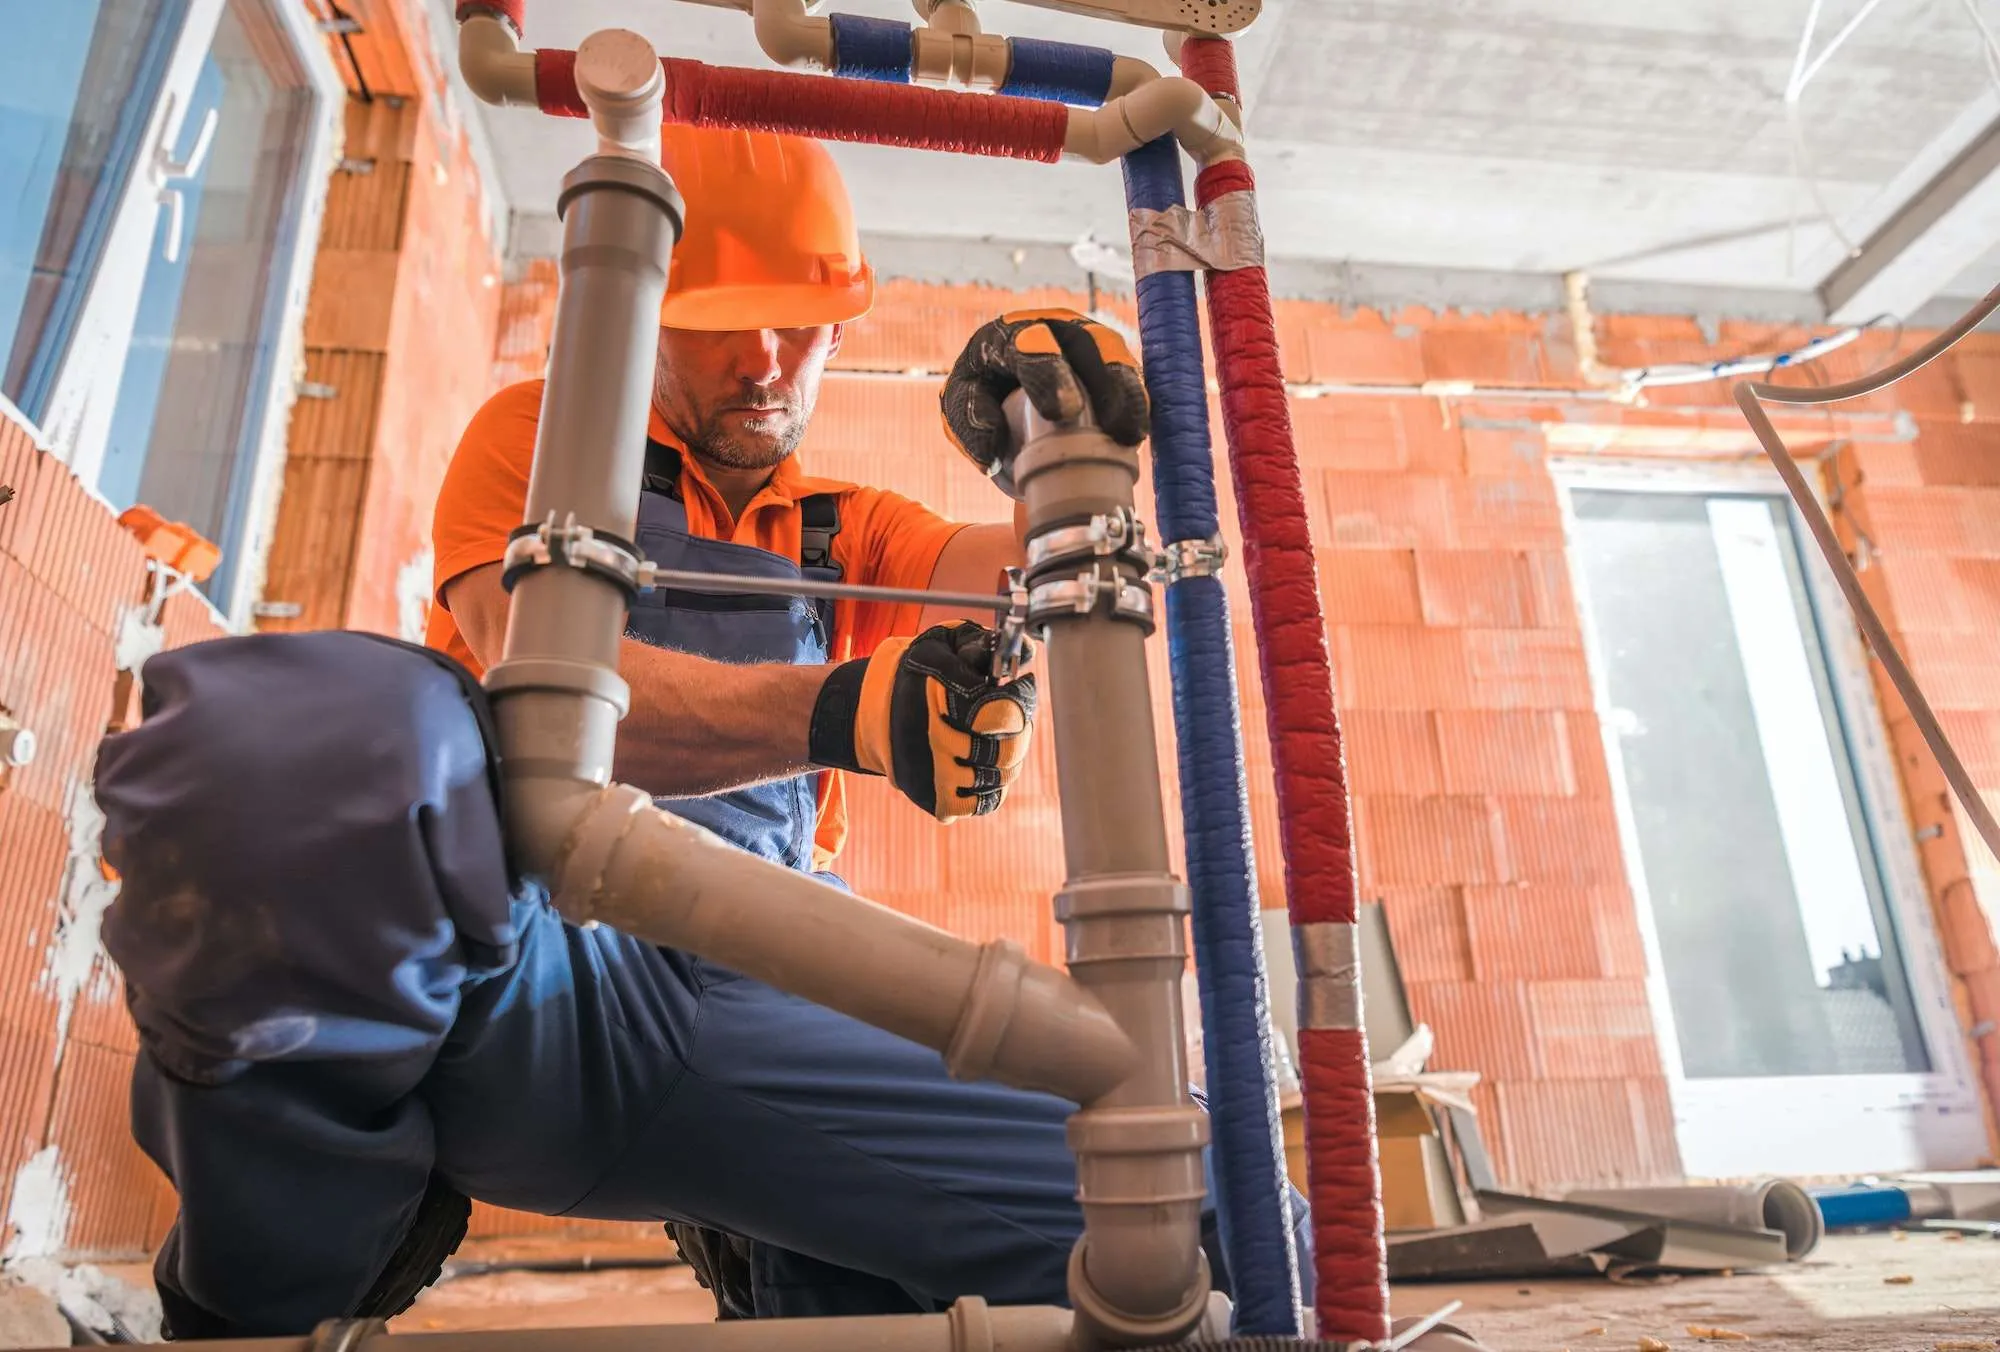 Protect your plumbing business with our commercial insurance, offering access to 50+ carriers for optimal coverage and rates.